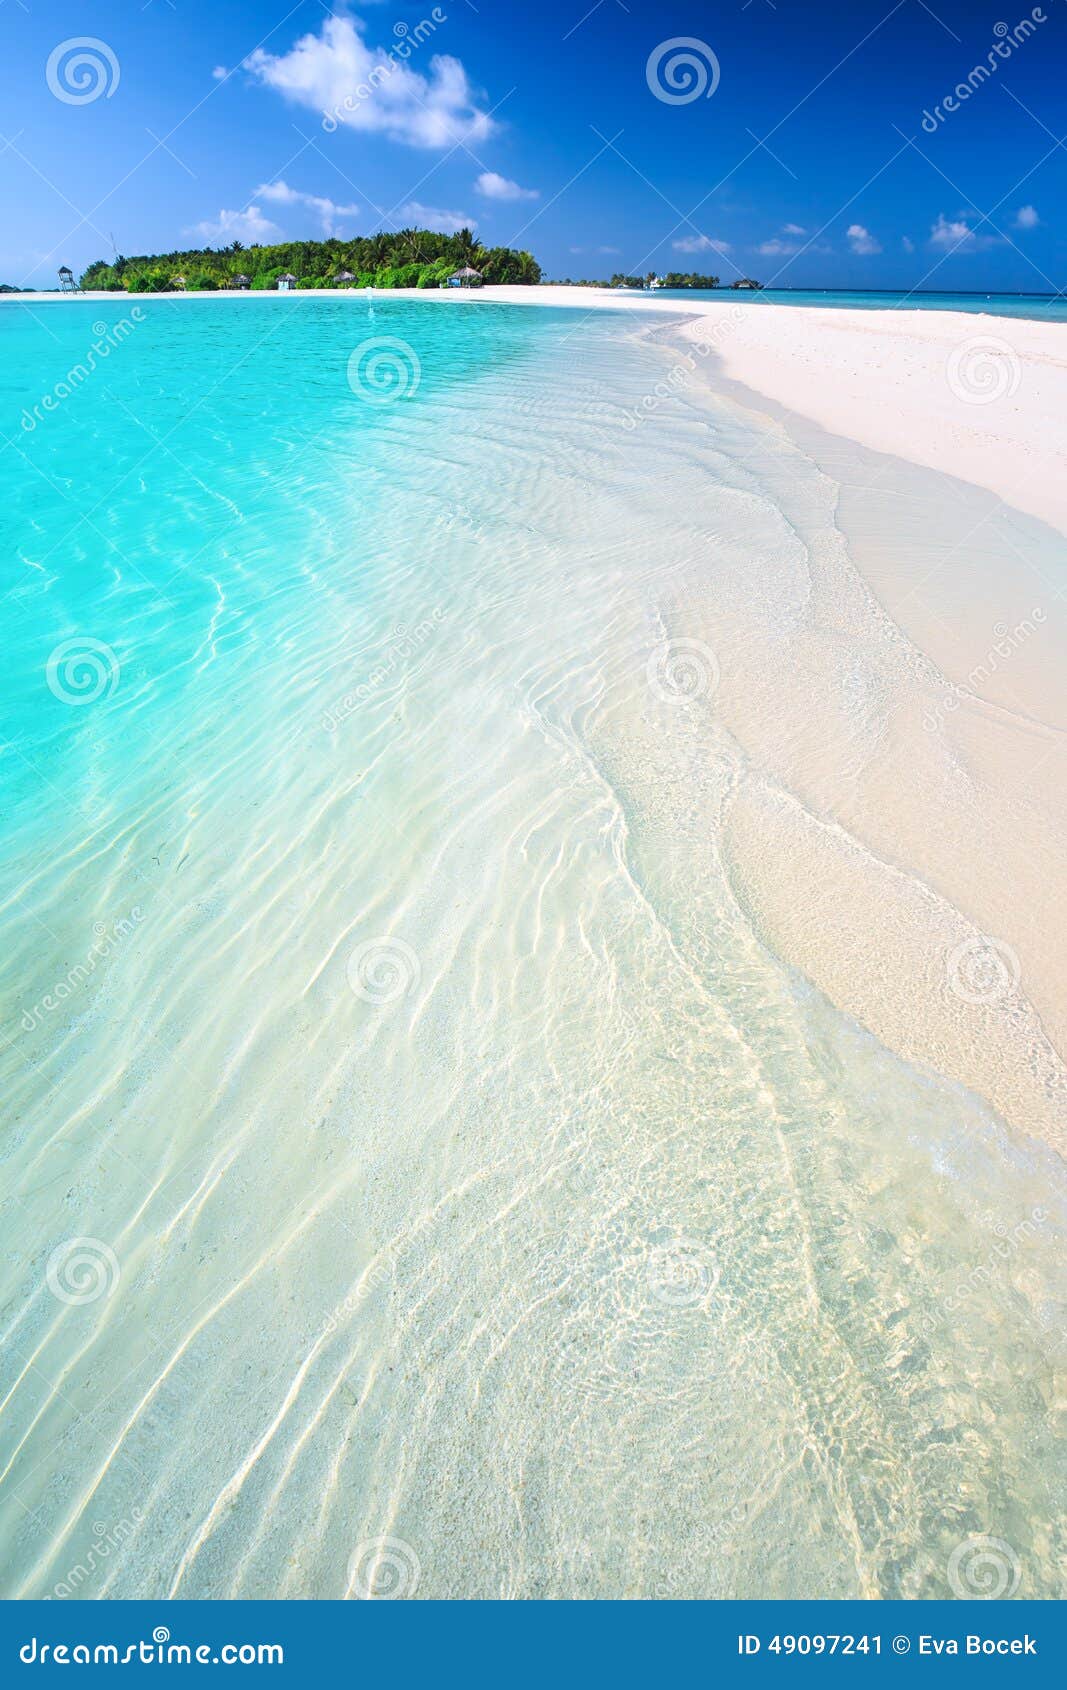 tropical island with sandy beach with palm trees and tourquise clean water in maldives